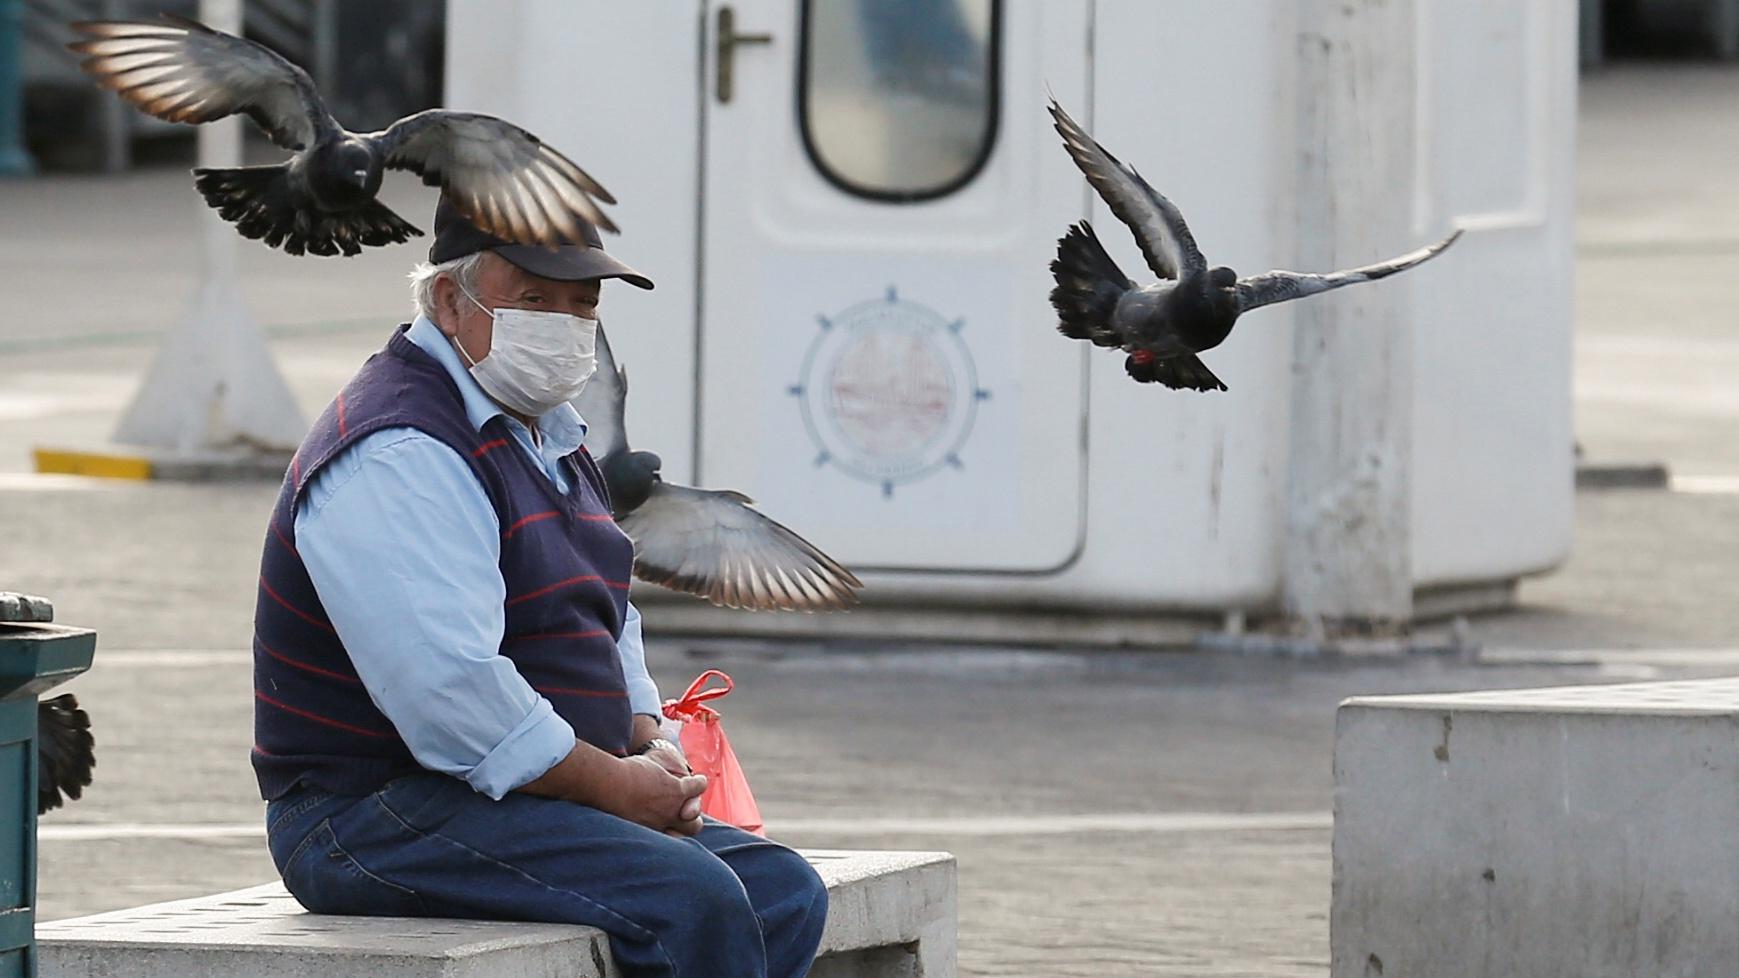 Man sits on bench with mask and bird flies overhead 